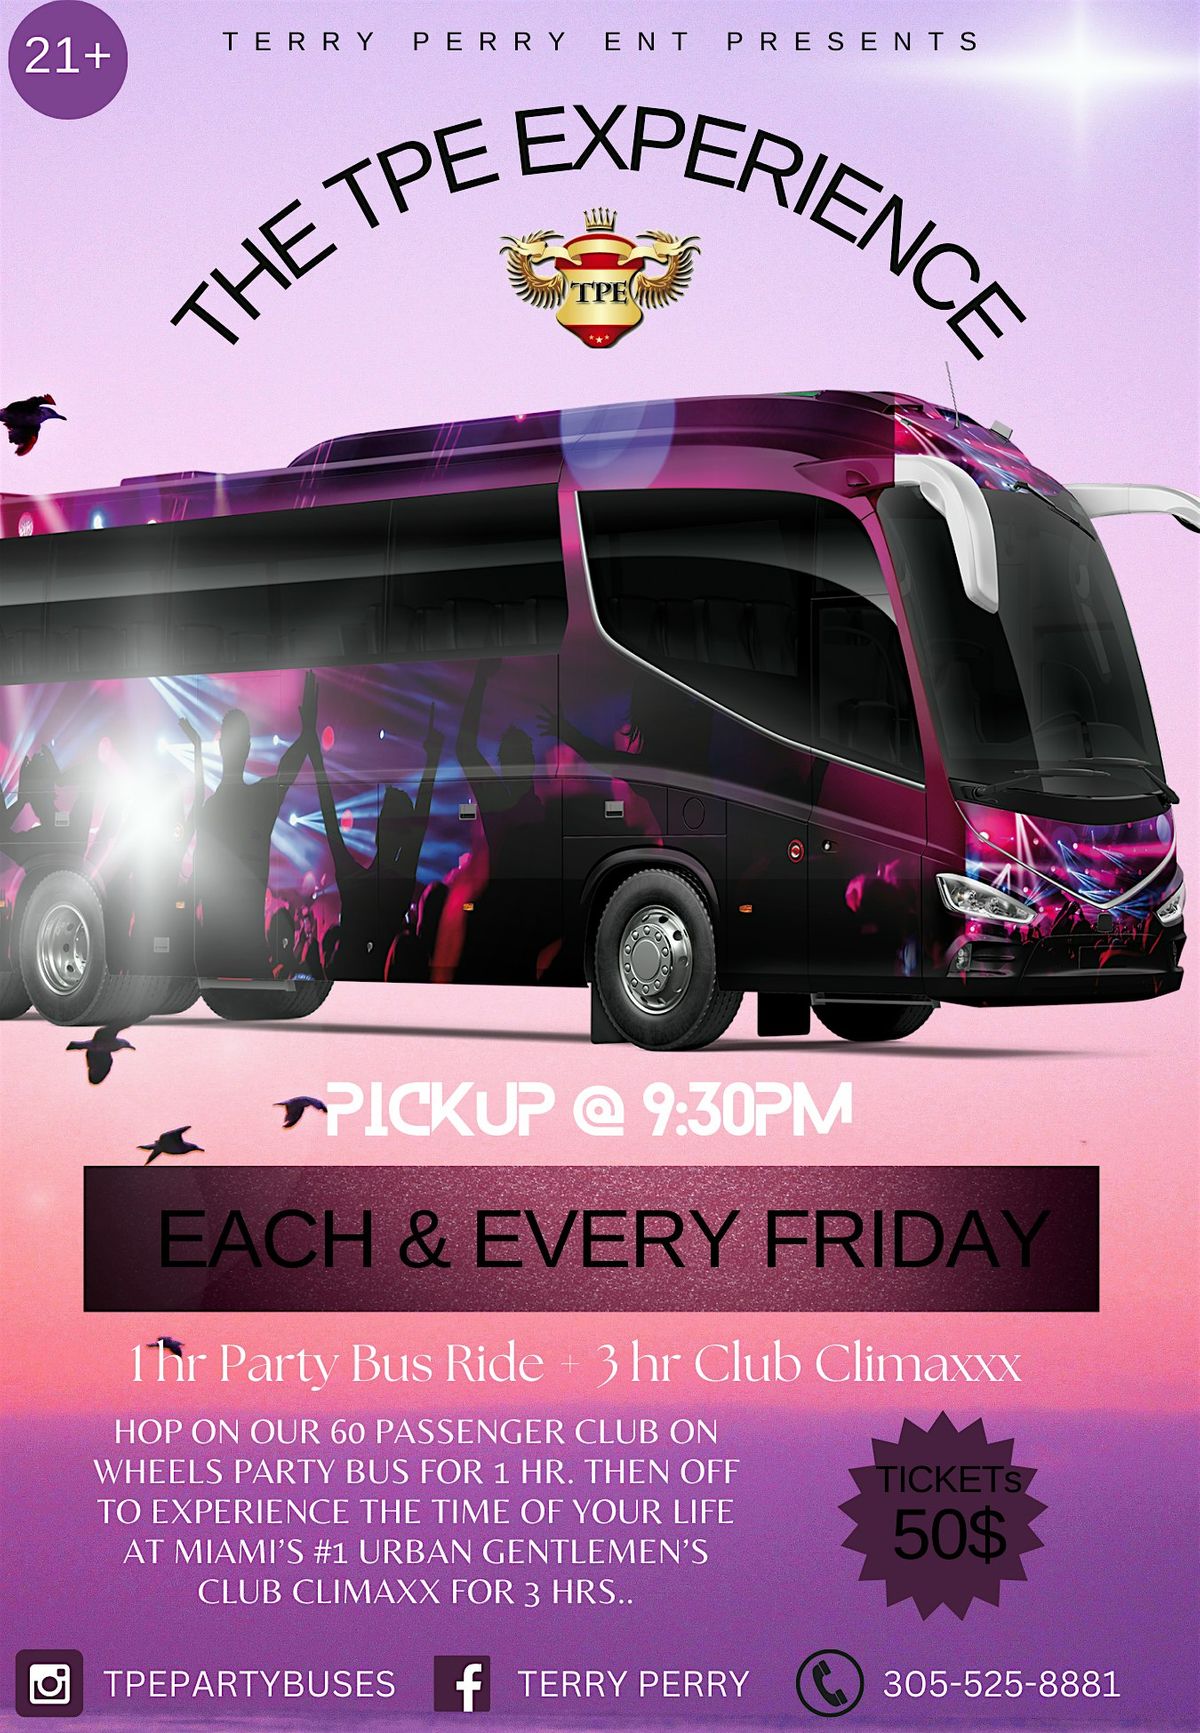 The TPE Experience!!! Party Bus + Night Club